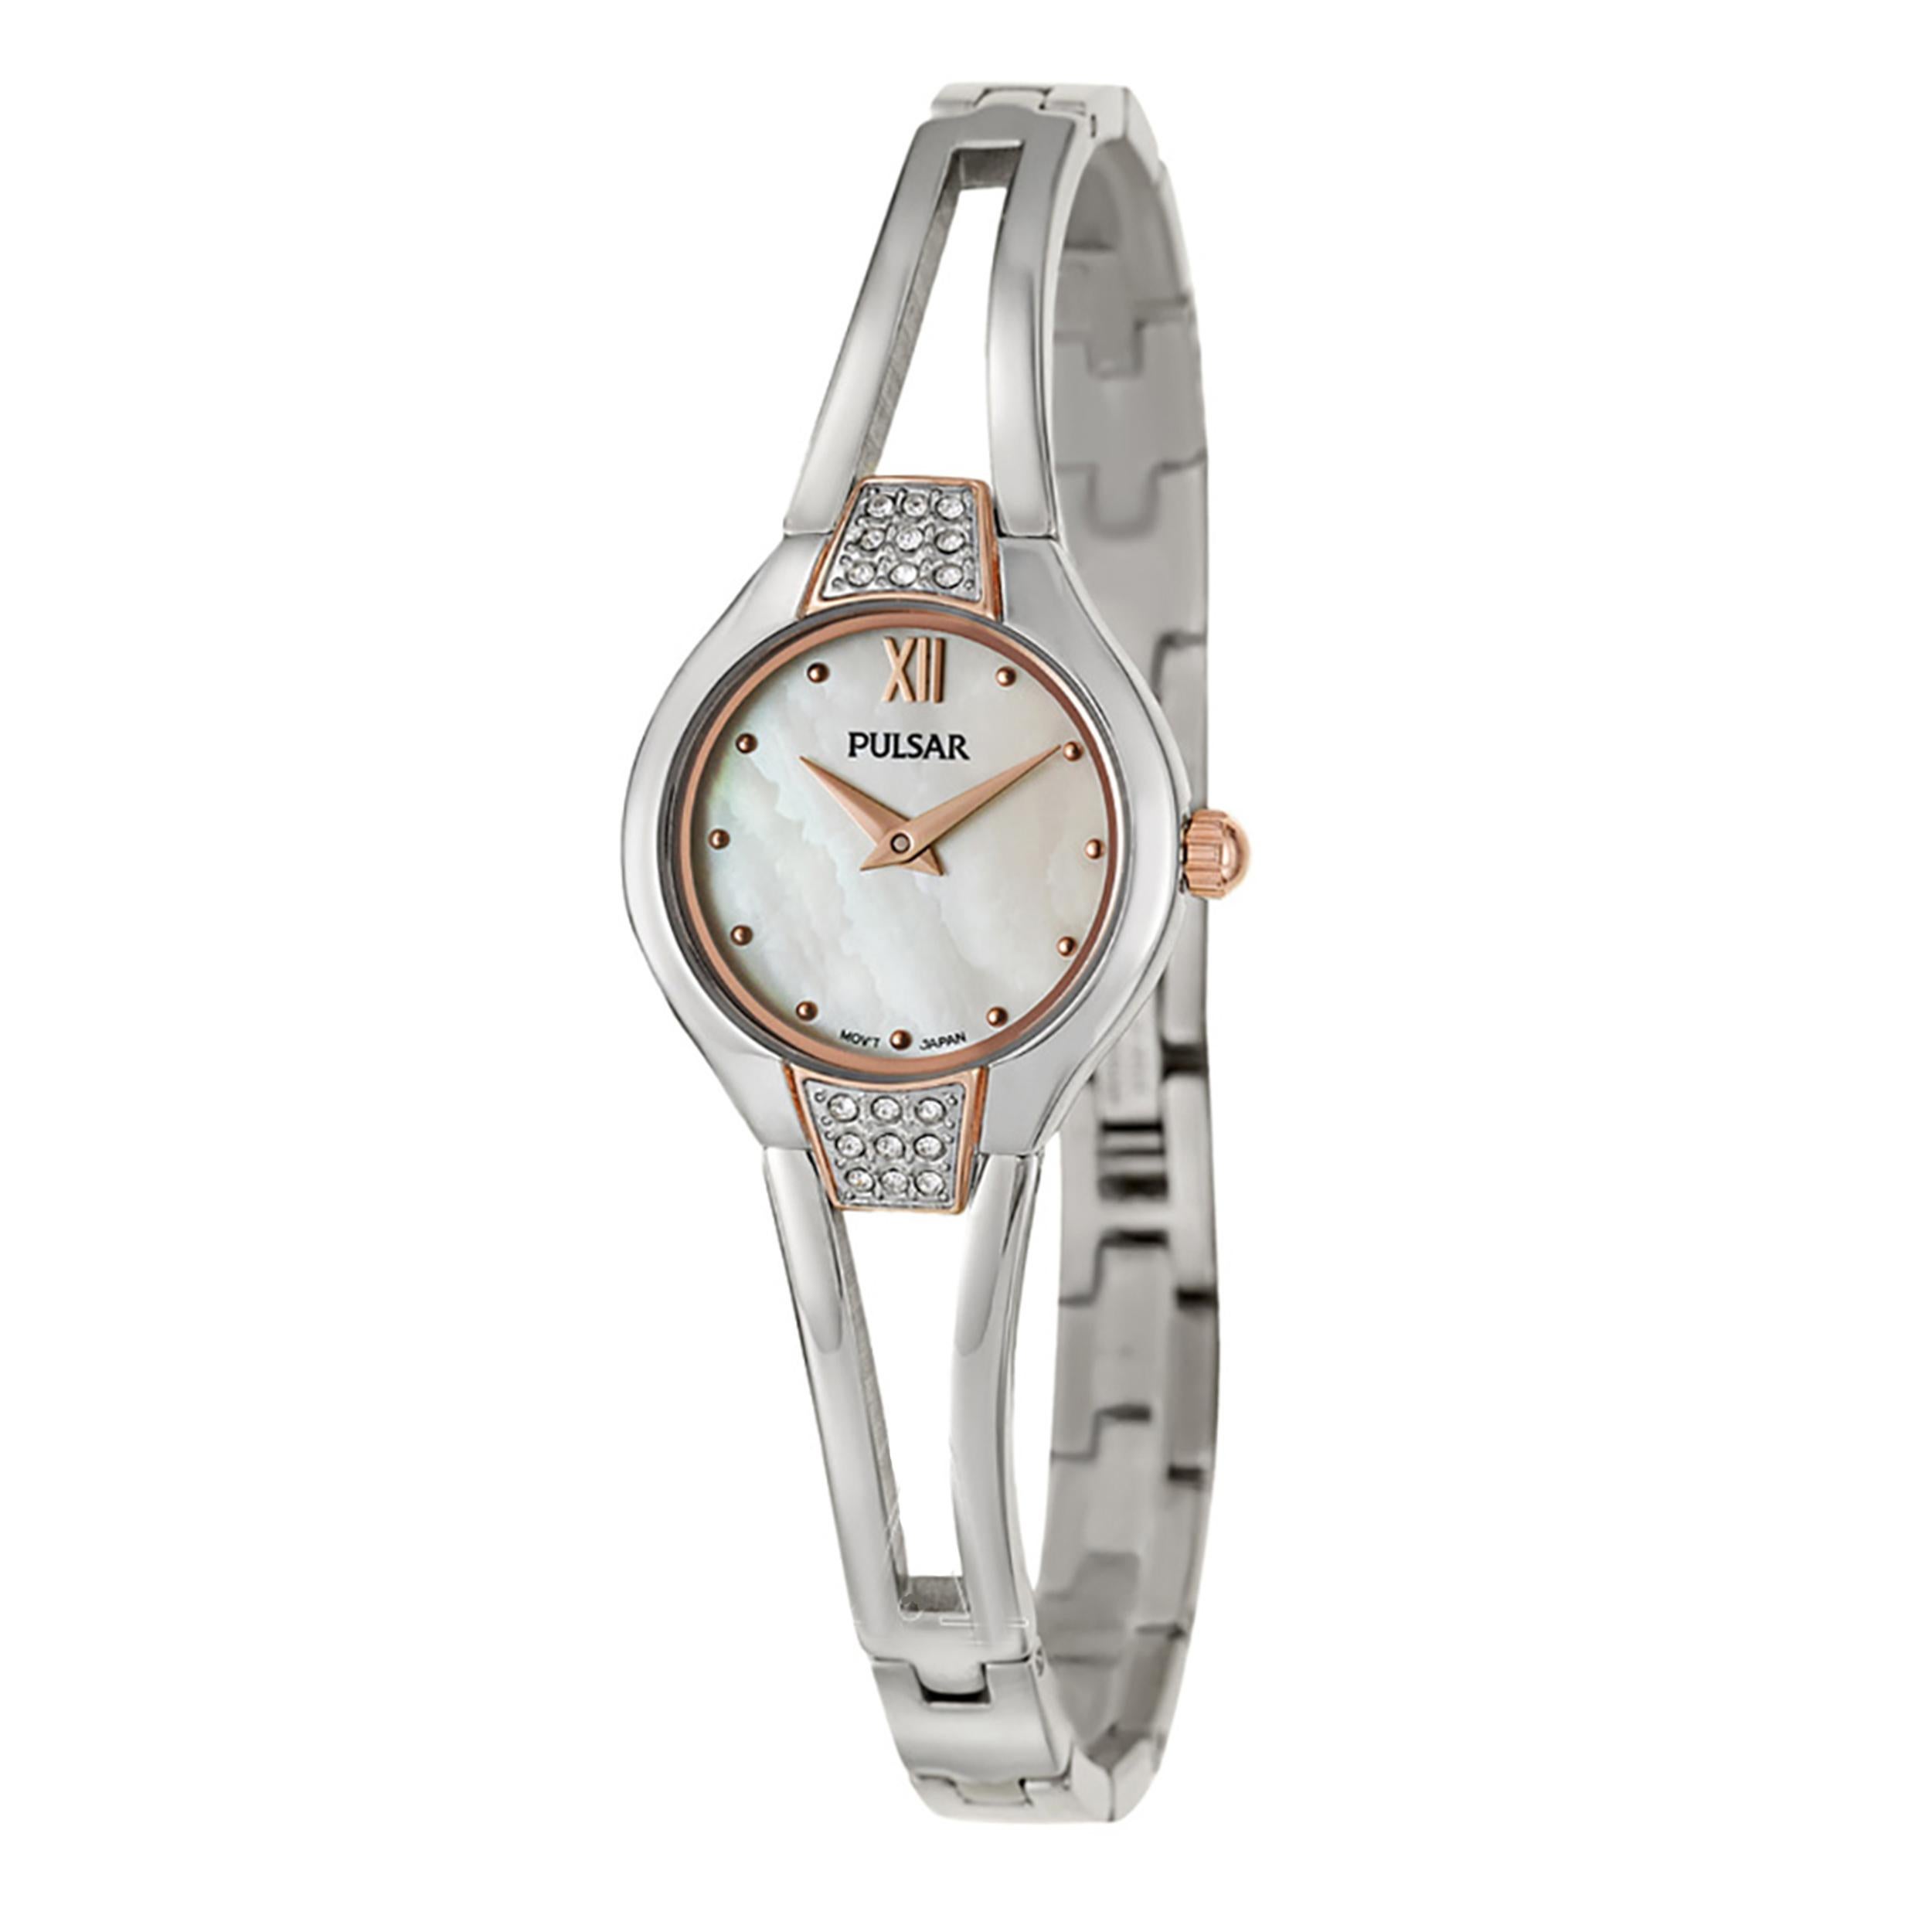 Pre-owned Pulsar Stainless Steel Crystal White MOP Dial Ladies Quartz Watch PTA502. The band of this watch has visible scratches, and  the case has hairline scratches. This Beautiful Timepiece Is Powered by a Quartz (Battery) Movement and Features: